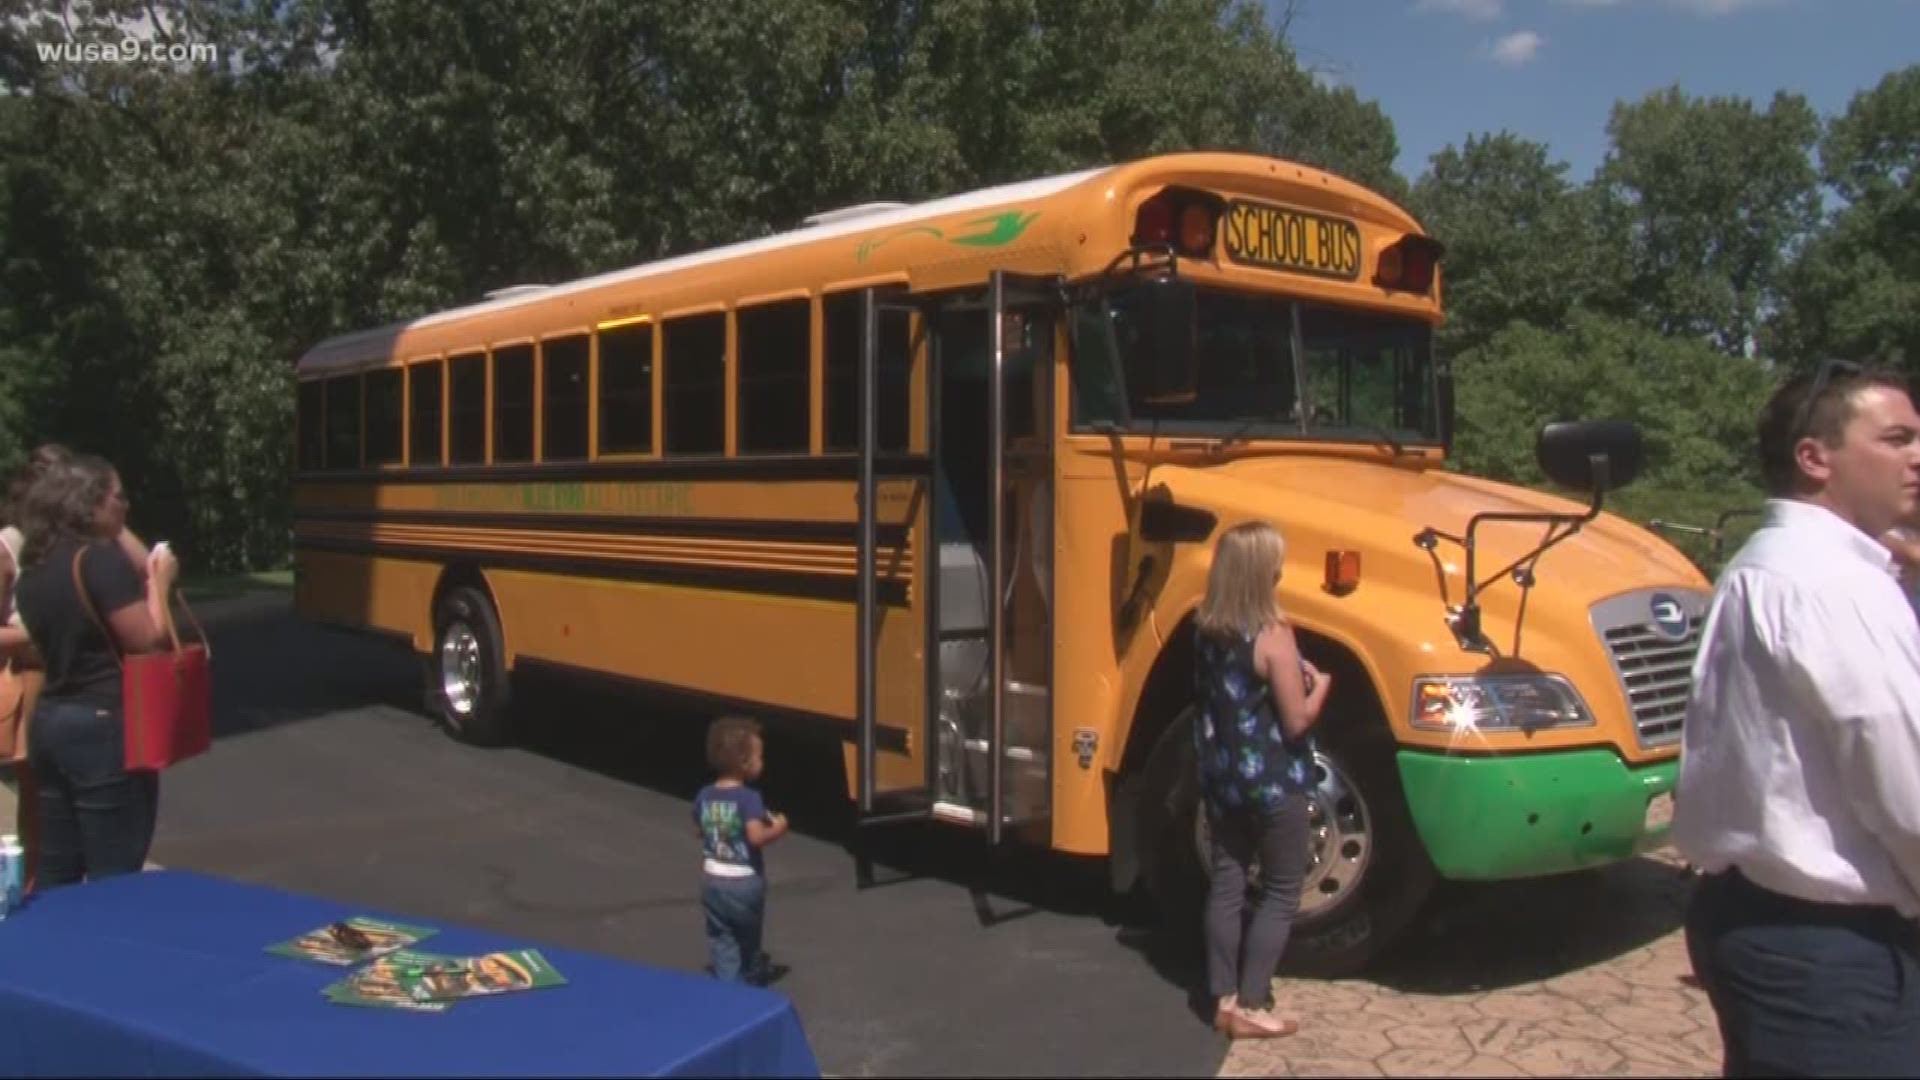 Dominion Energy is partnering with school districts that want zero-emission buses.